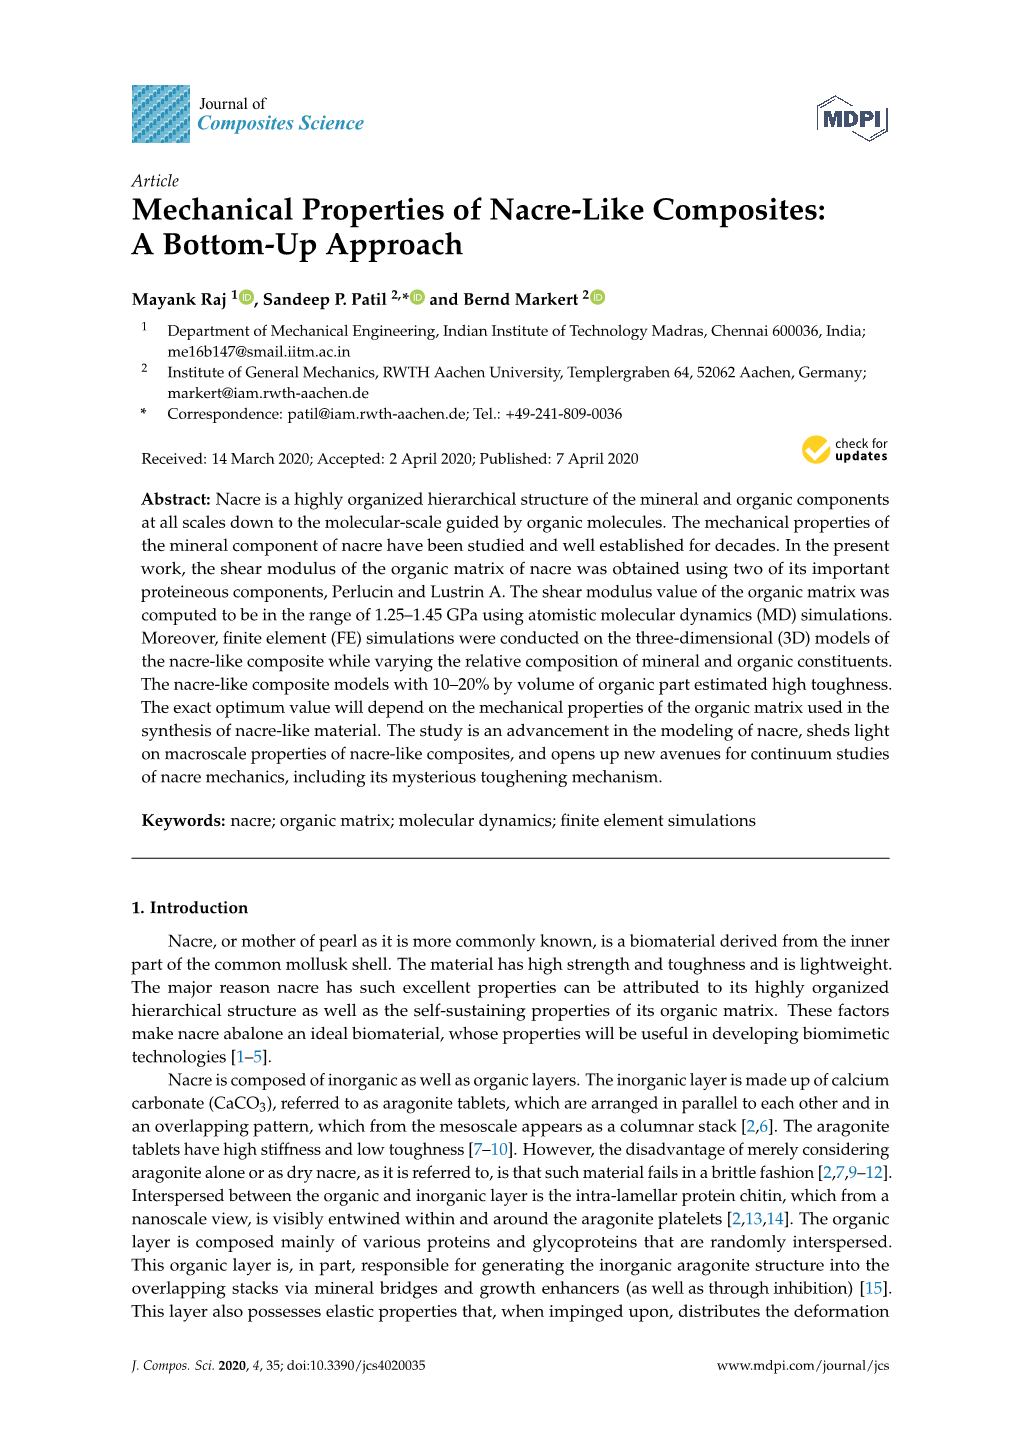 Mechanical Properties of Nacre-Like Composites: a Bottom-Up Approach